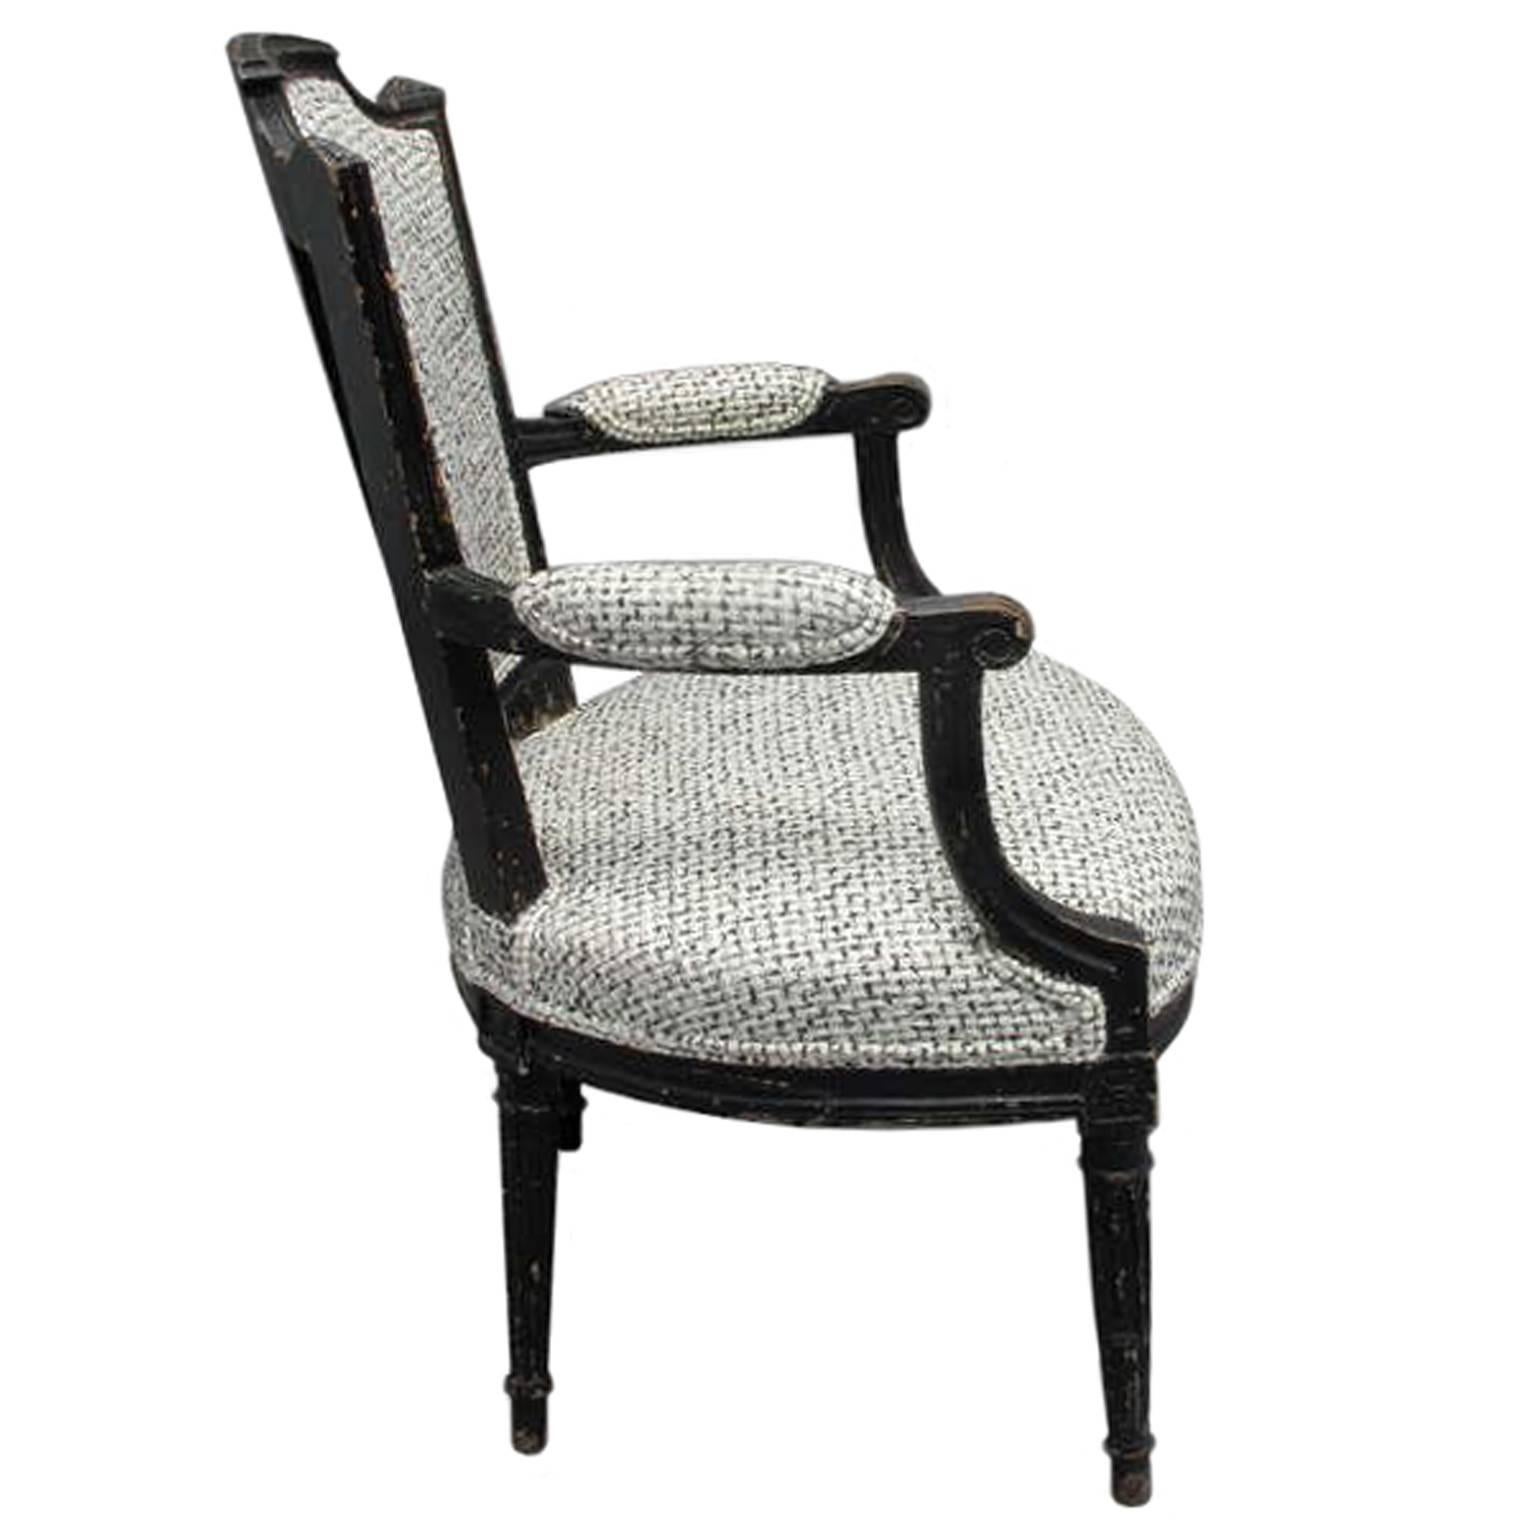 1940s French ebonized armchair upholstered in black and ivory bouclé.